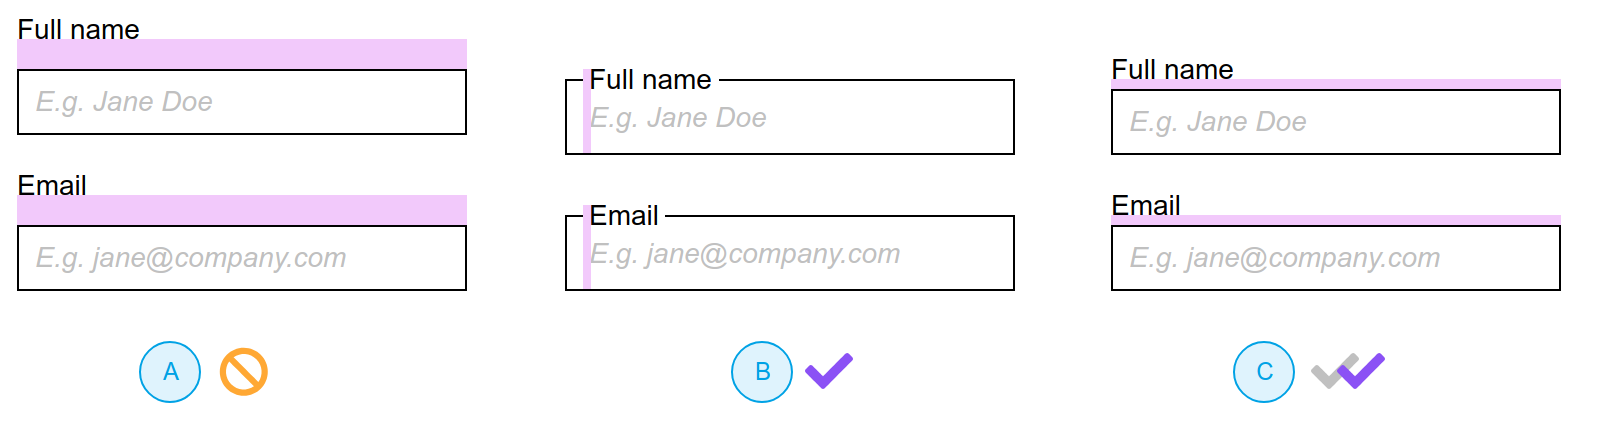 how to create a form